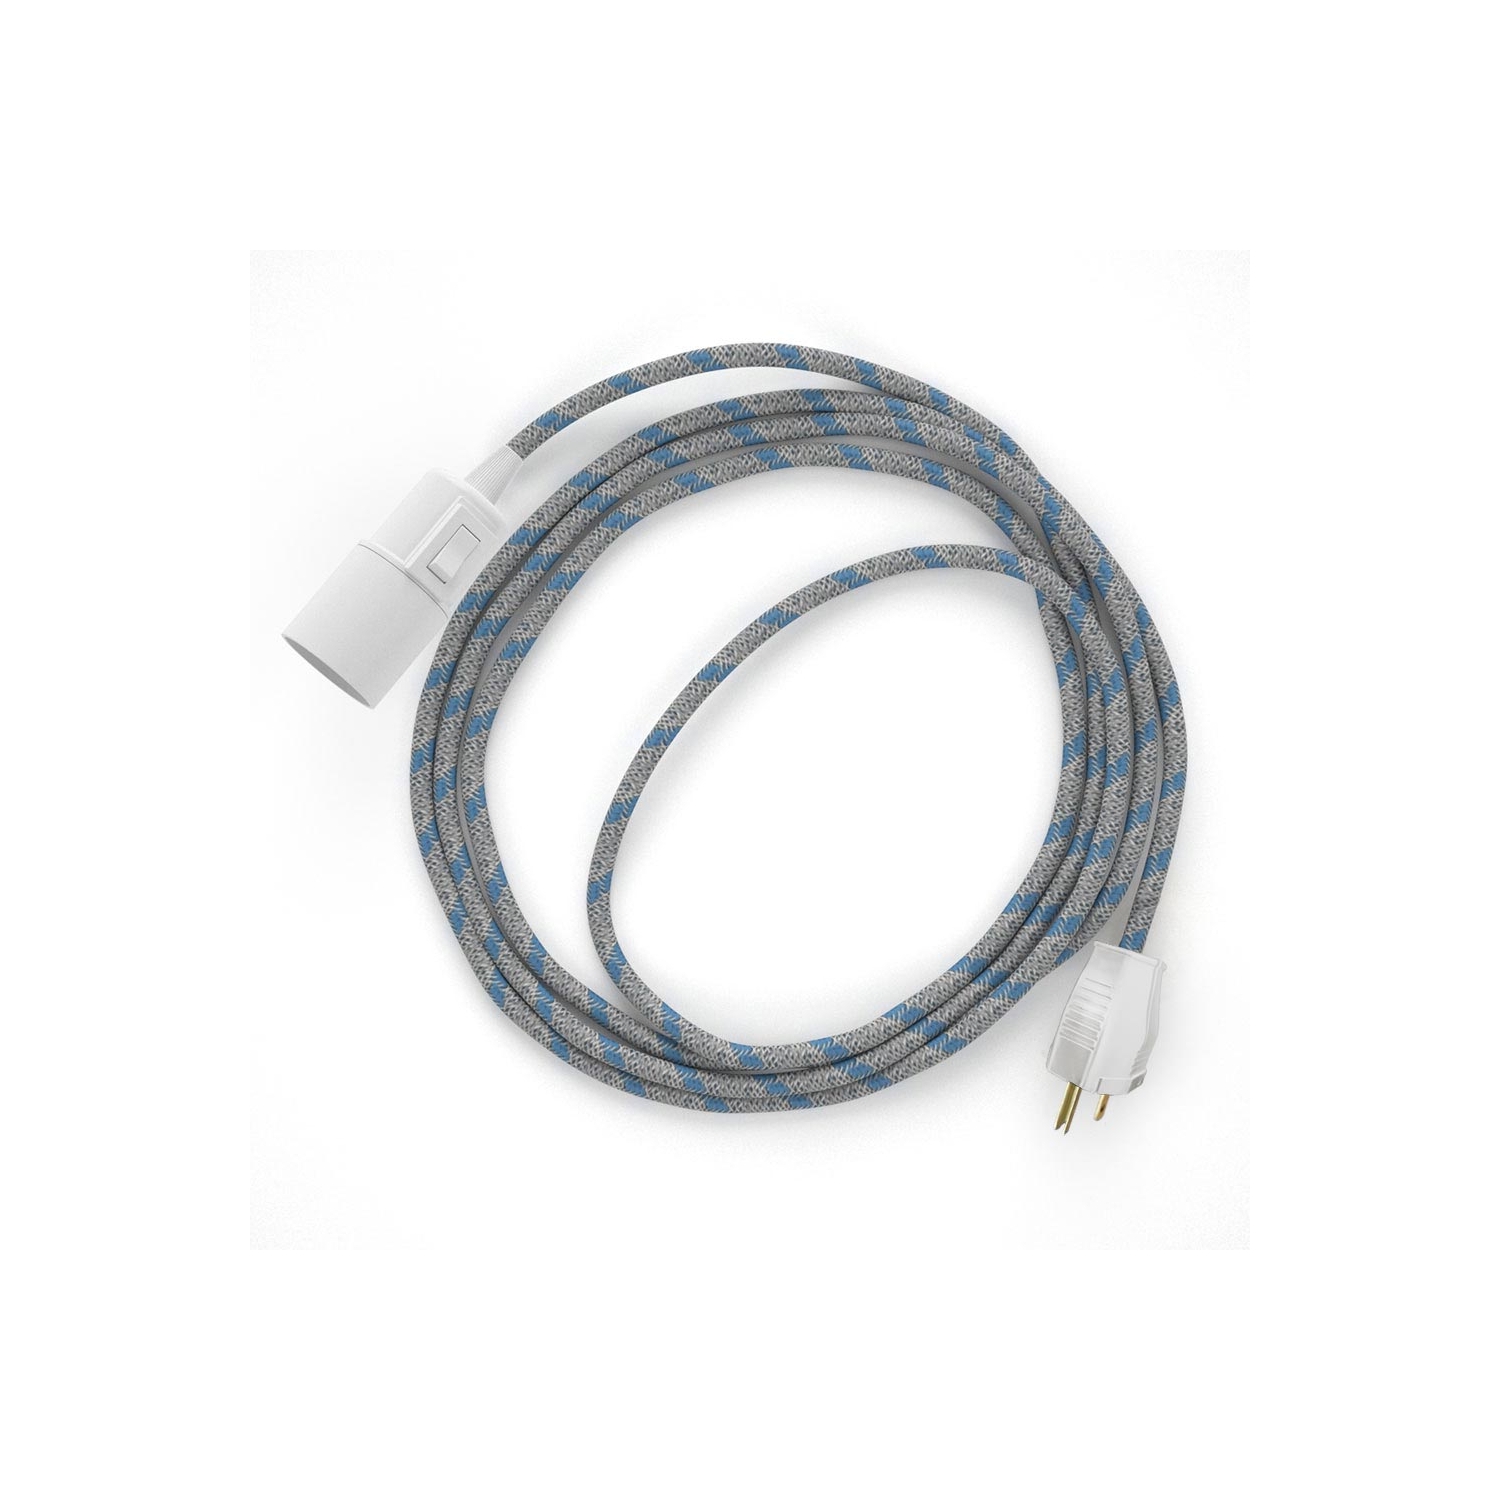 Plug-in Pendant with switch on socket | RD55 Natural & Blue Linen Stripe